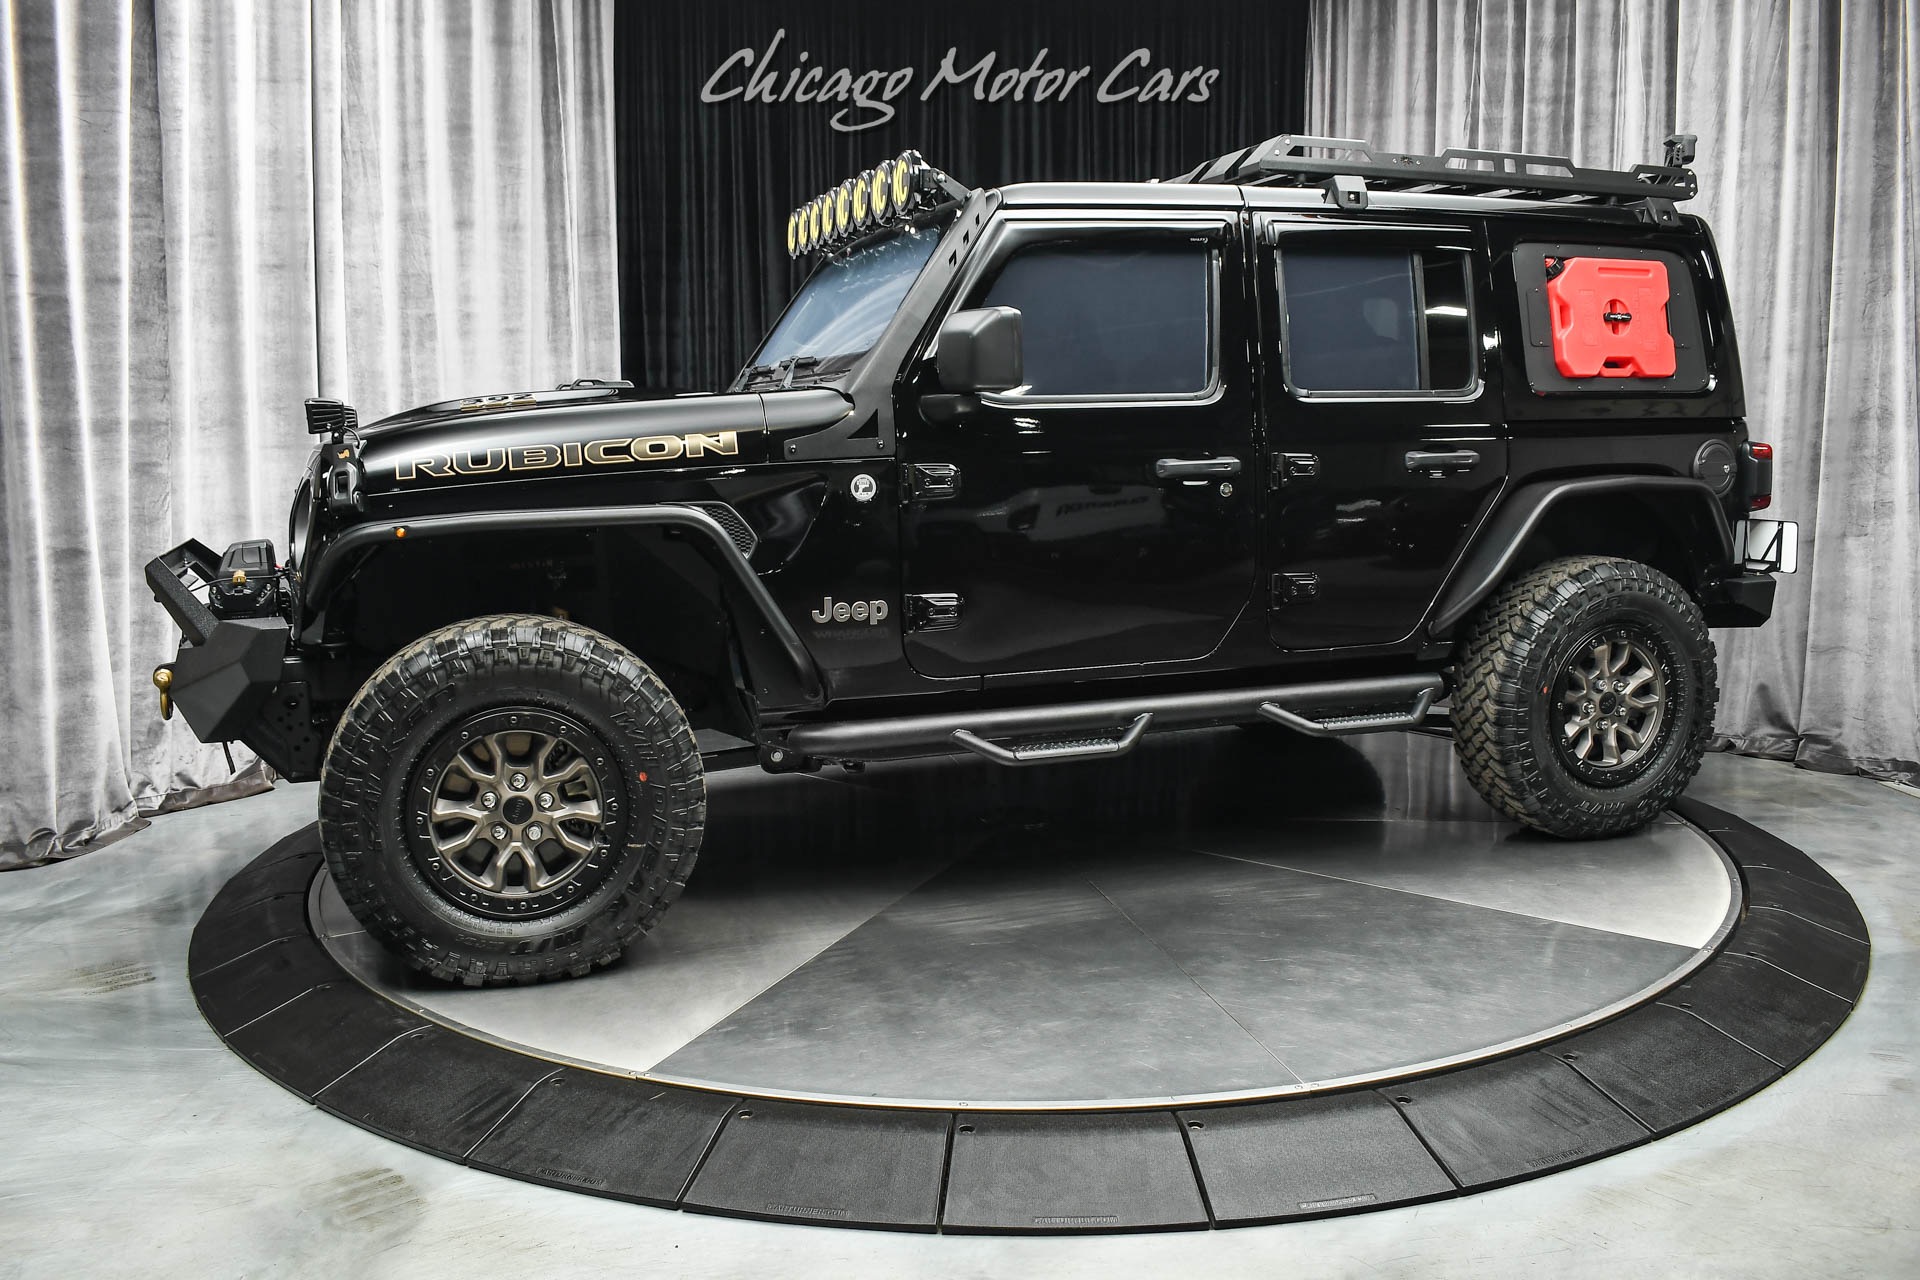 Used 2021 Jeep Wrangler Unlimited Rubicon 392 4x4 BULLET RESISTANT! Loaded  with Upgrades! Armored! For Sale ($189,800) | Midwest Truck Group Stock  #MW732929-MK